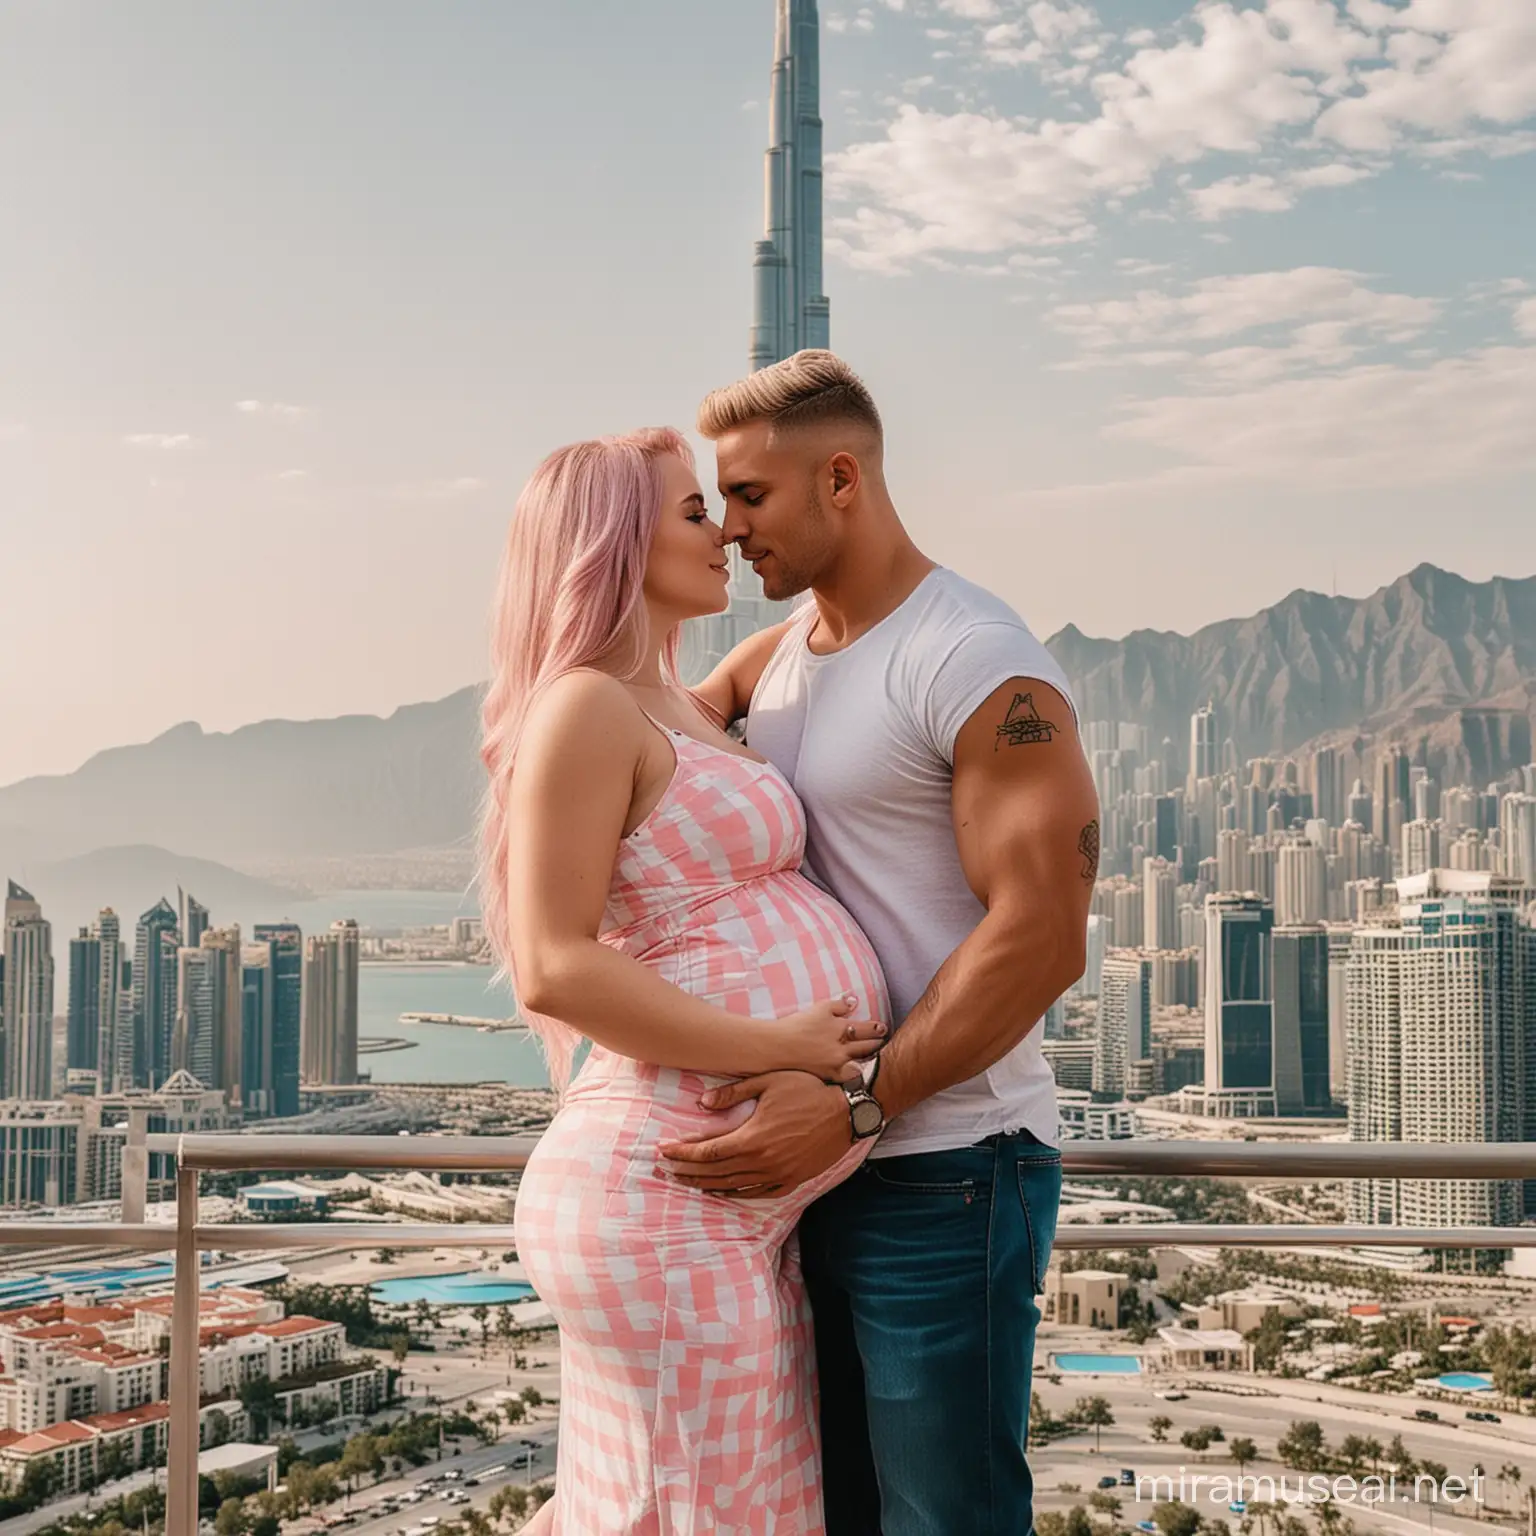 Make a cute couple. The woman has blonde and pink hair and blue eyes. The man is very muscular and has a checkered stomach, light brown and blond hair and blue eyes. The woman is pregnant and her husband hugs her and they kiss 😘. in the background there should be a huge mountain, a skyscraper like the one in Dubai, the Burj Khalifa floor should also have a beautiful sea with palm trees. The married couple built their huge luxury villa on the side of another mountain, they also have their own private plane with a private airport ❤️❤️❤️Bay sands Singapore hotel next to the Burj Khalifa should be visible in the background ,The Singapore hotel should also be visible!!